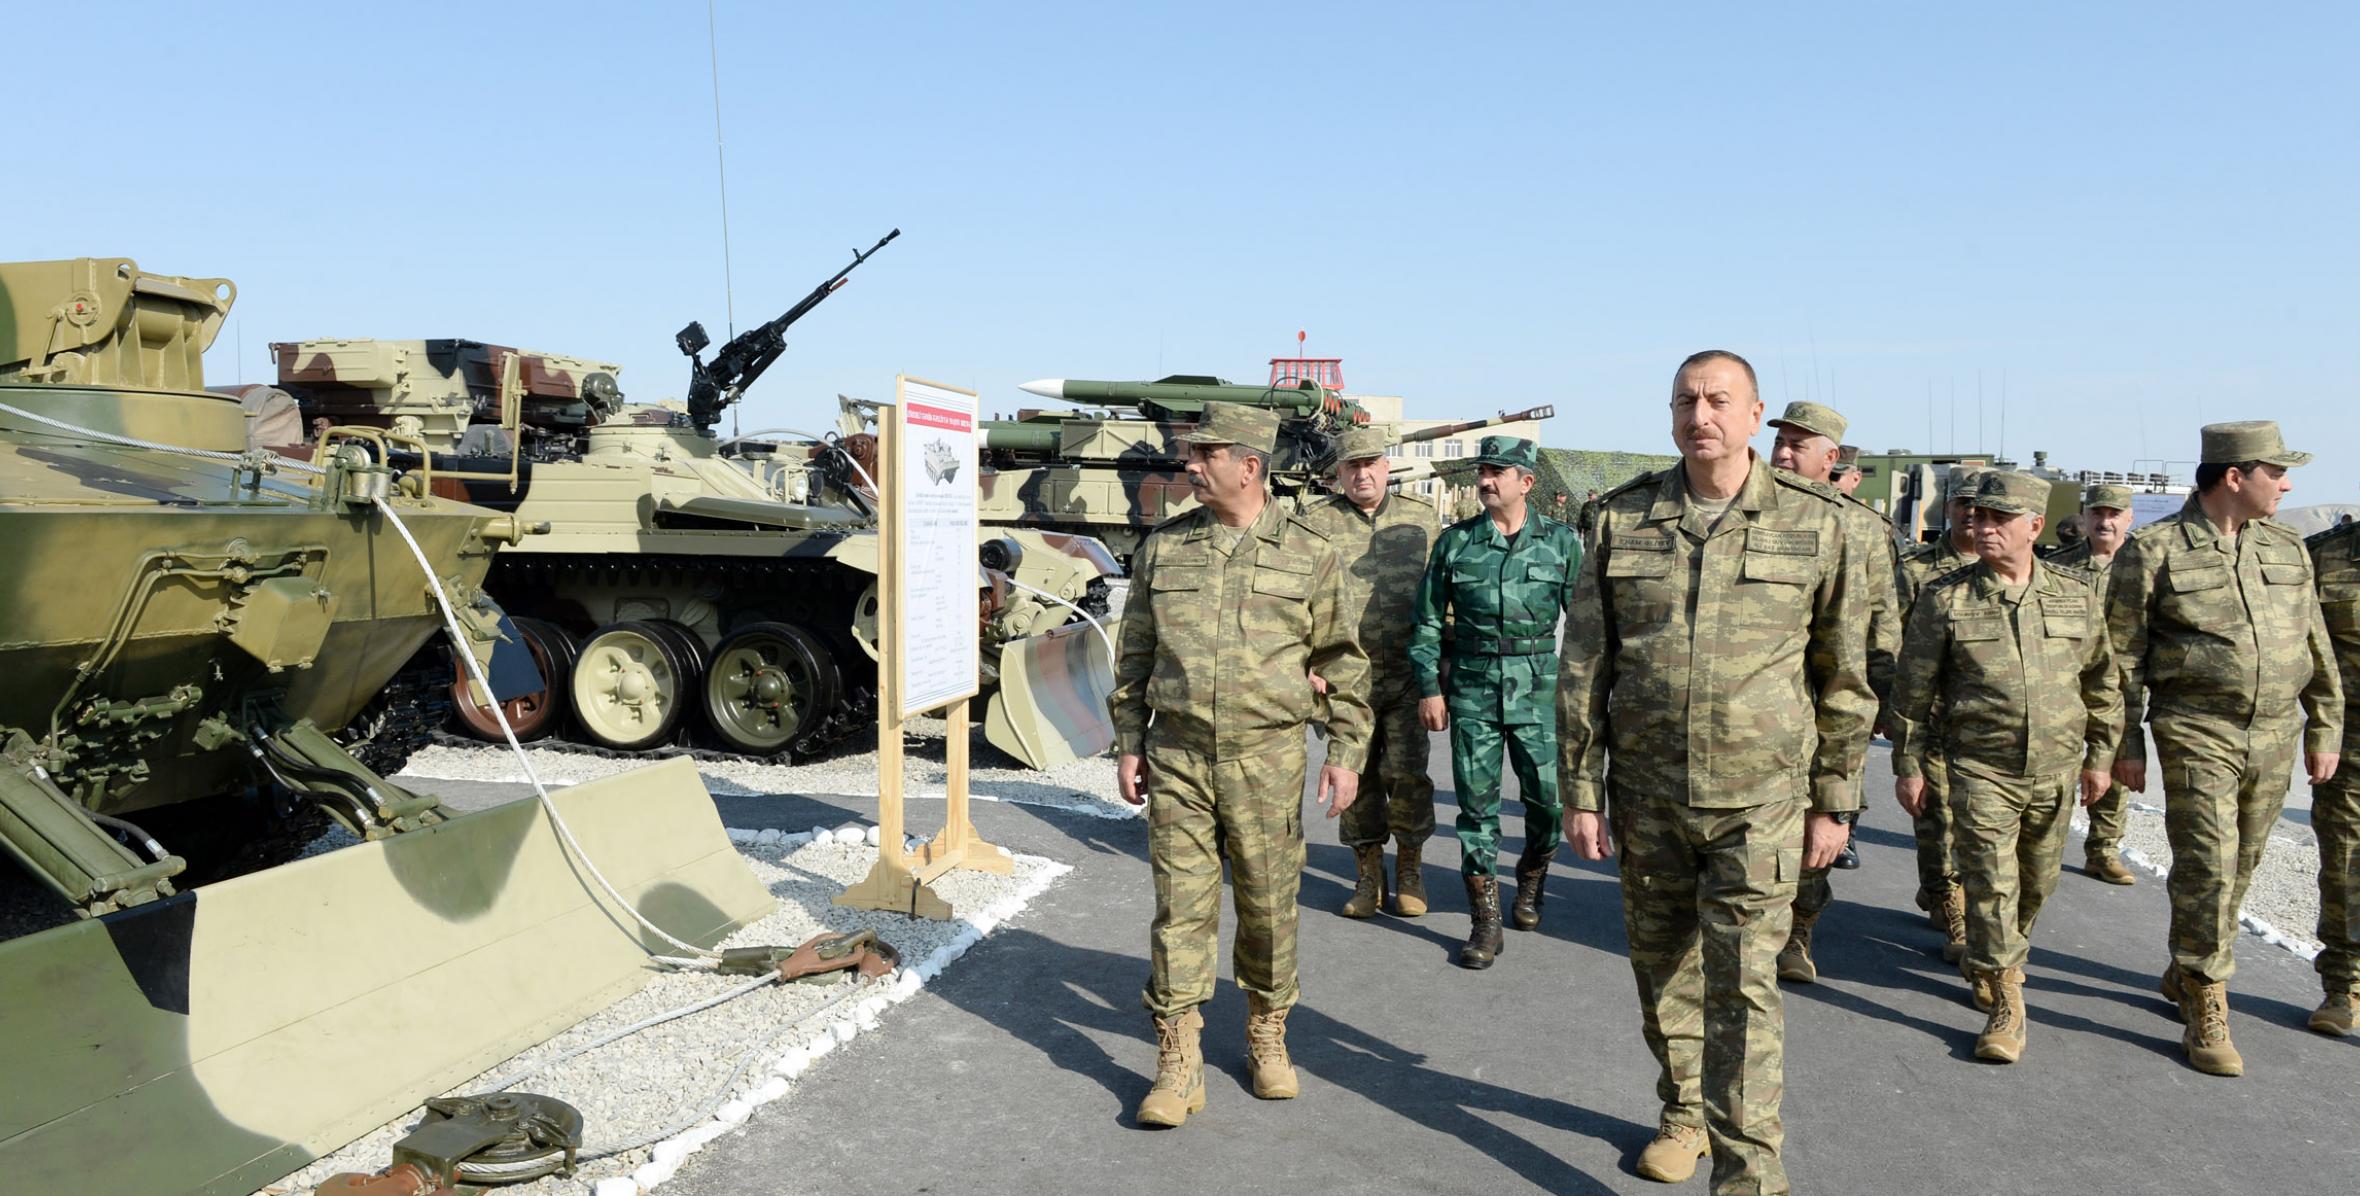 Ilham Aliyev watched the joint operational and tactical exercises of the formations and units of the Ministry of Defense, Internal Troops of the Ministry of Internal Affairs and the State Border Service on the occasion of the 96th anniversary of the establishment of the Armed Forces of Azerbaijan